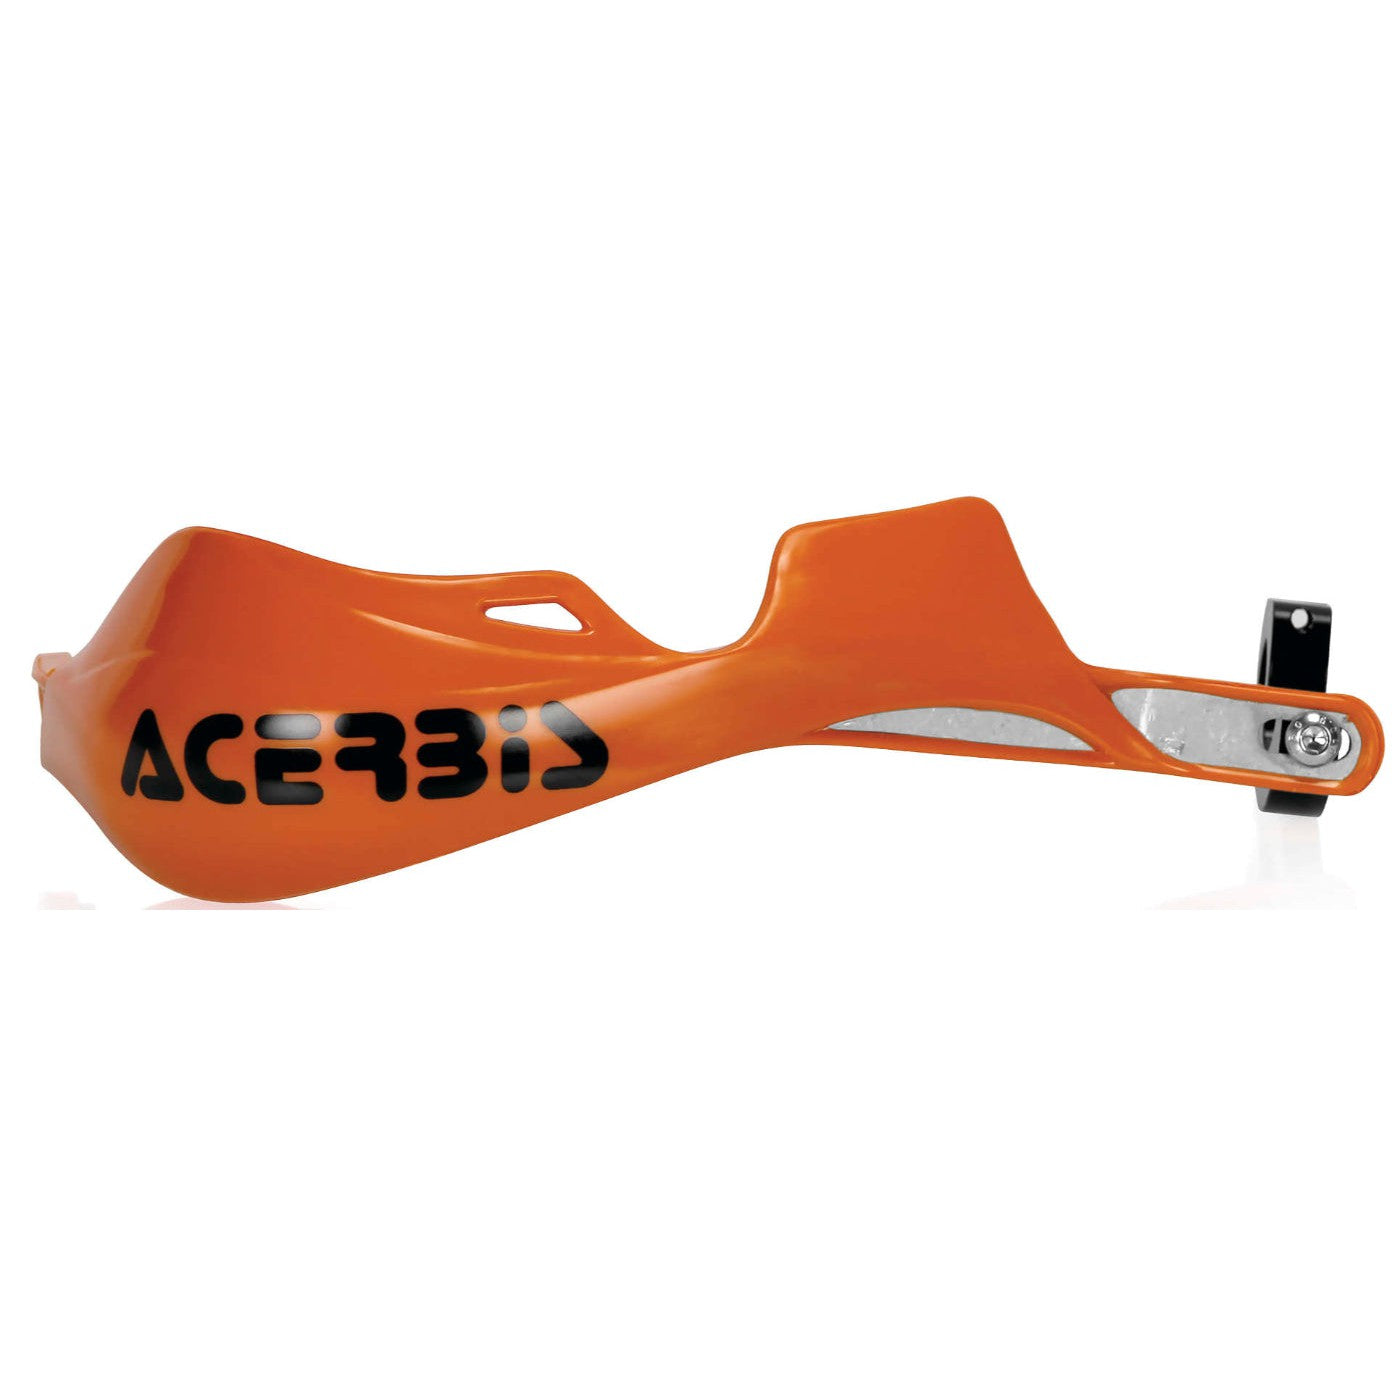 Acerbis Orange Rally Pro Handguards with X-Strong Universal Mount Kit - 2142000237